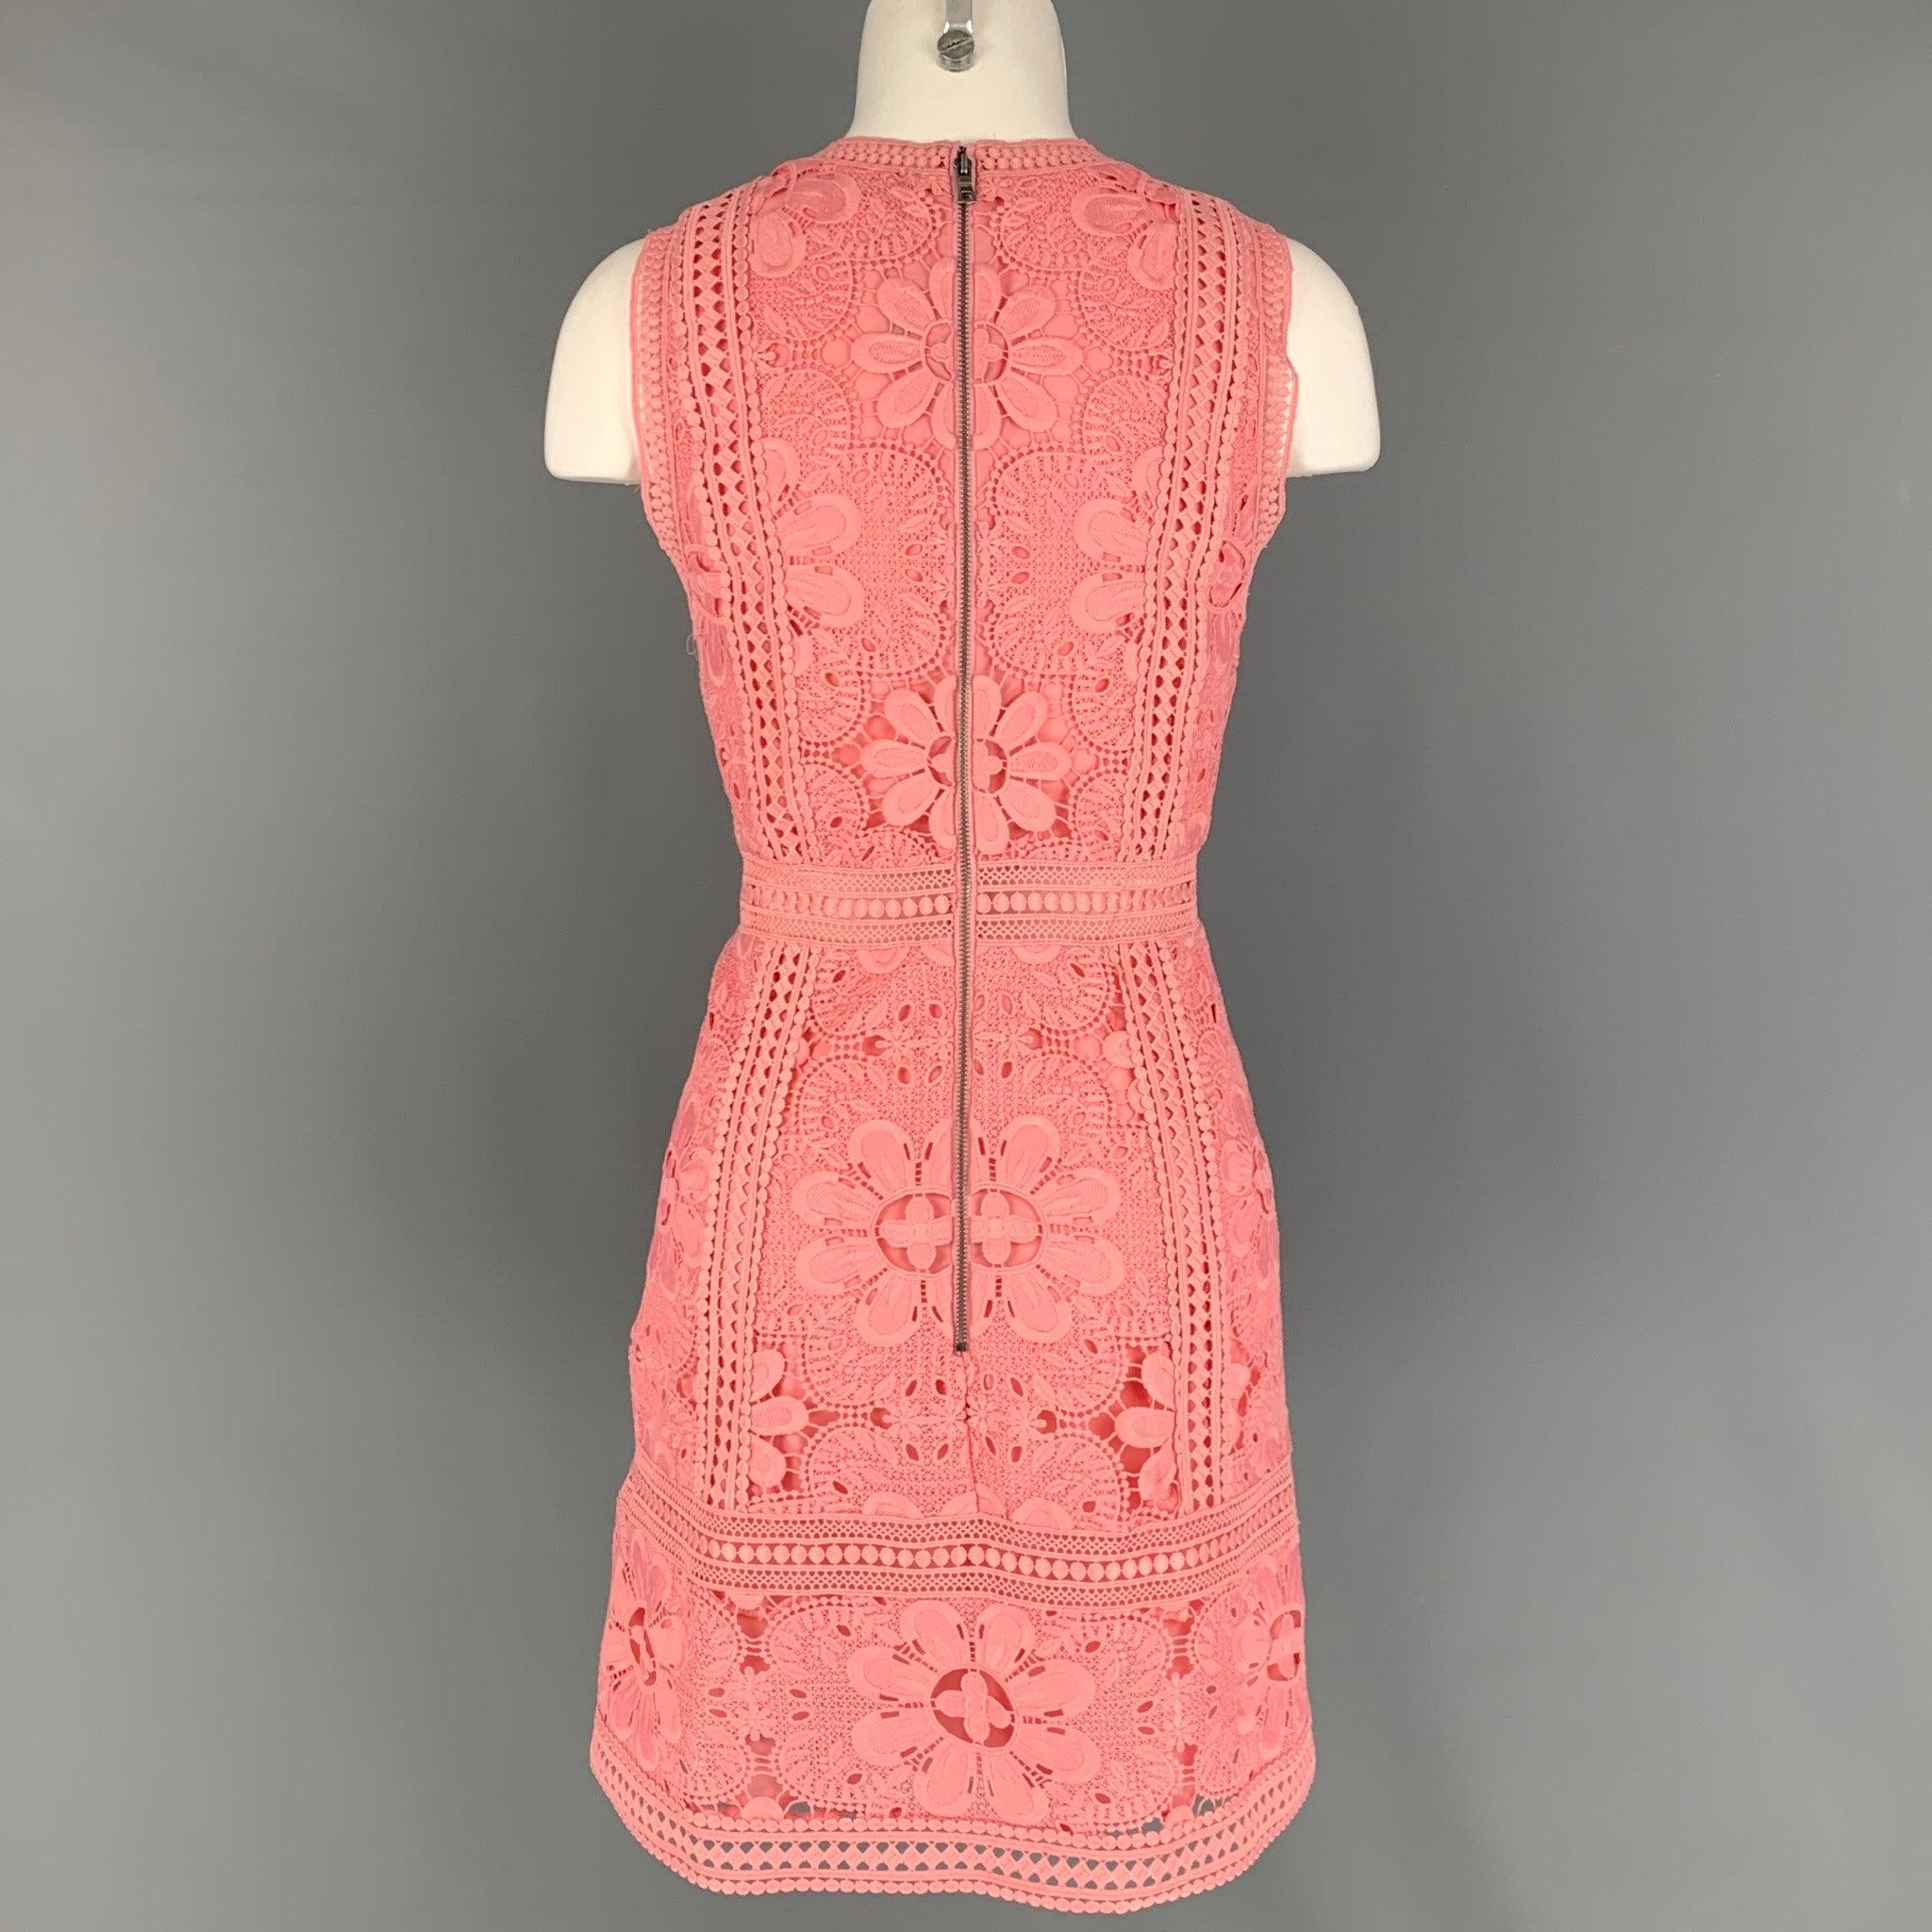 ALICE + OLIVIA Size 6 Rose Polyester Lace A-Line Dress In Good Condition For Sale In San Francisco, CA